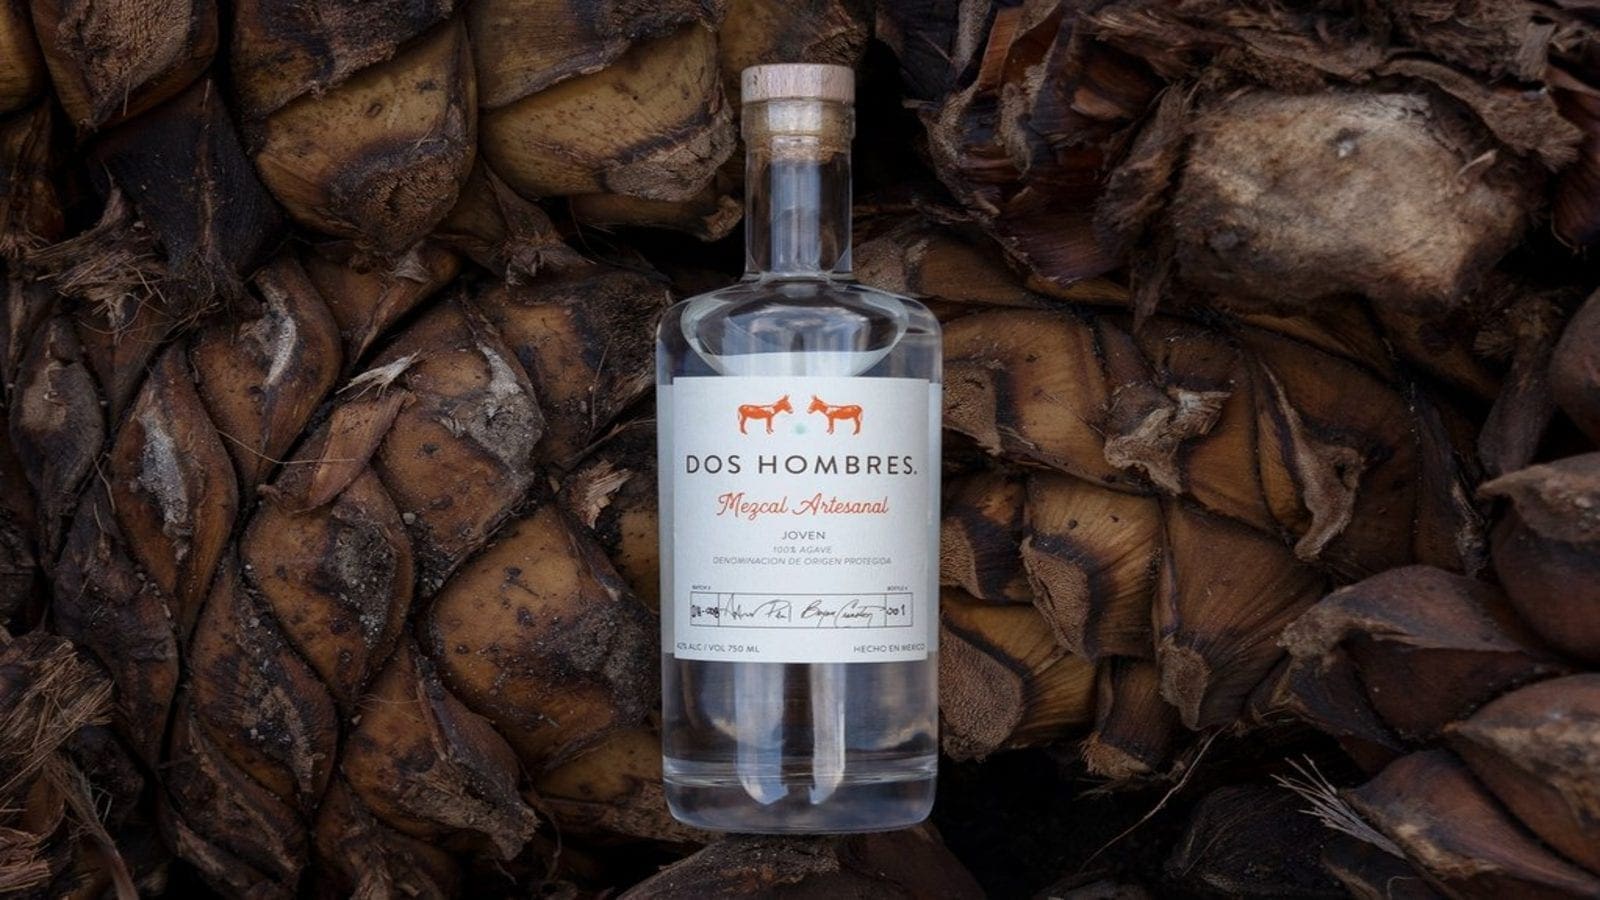 Constellation Brands eyes a share of rapidly growing mezcal drinks market with investment in ‘Dos Hombres’